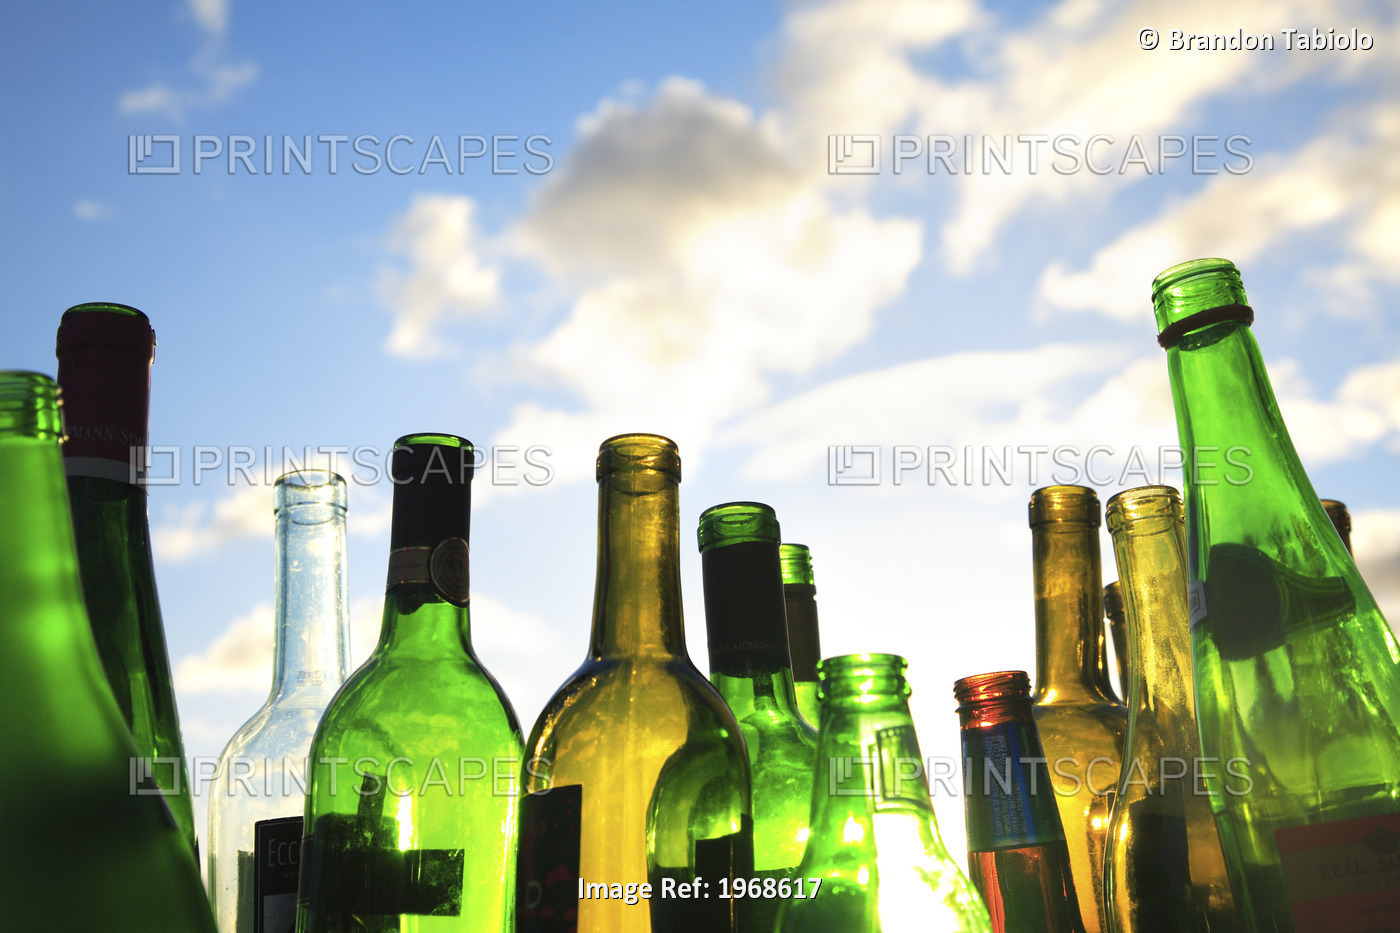 Hawaii, Oahu, Close Up Of Recyclable Glass Empty Wine And Beer Bottles